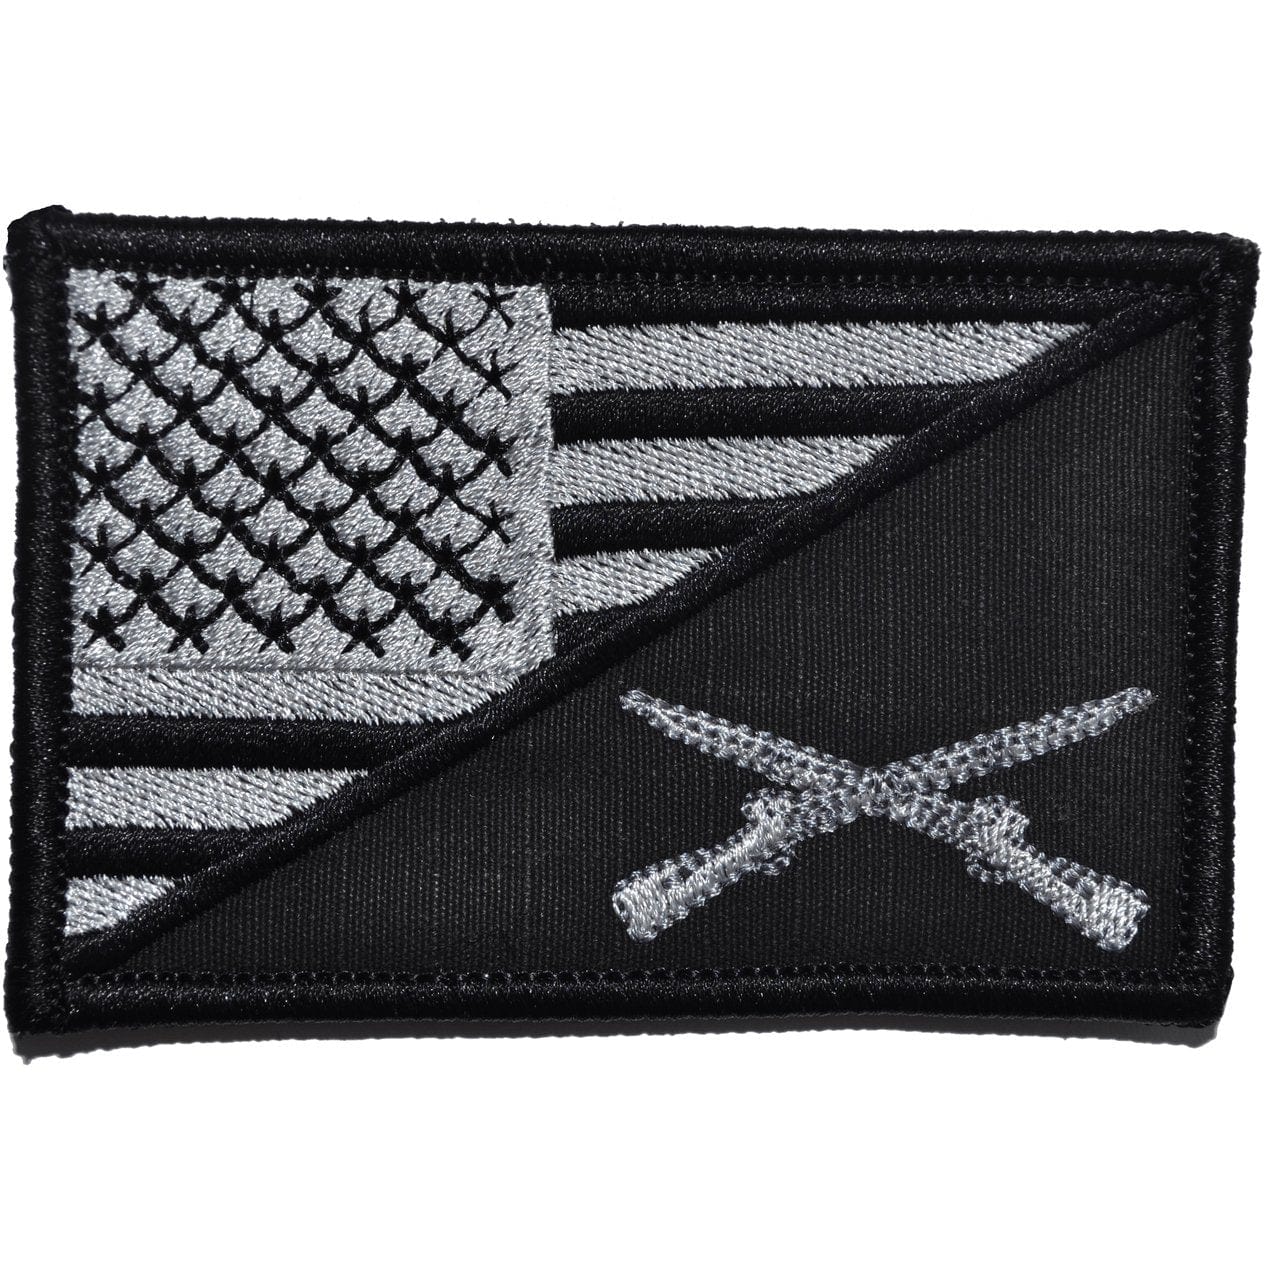 Flag Tactical Patches Norway Denmark Sweden Finland Camo IR Reflection  Military